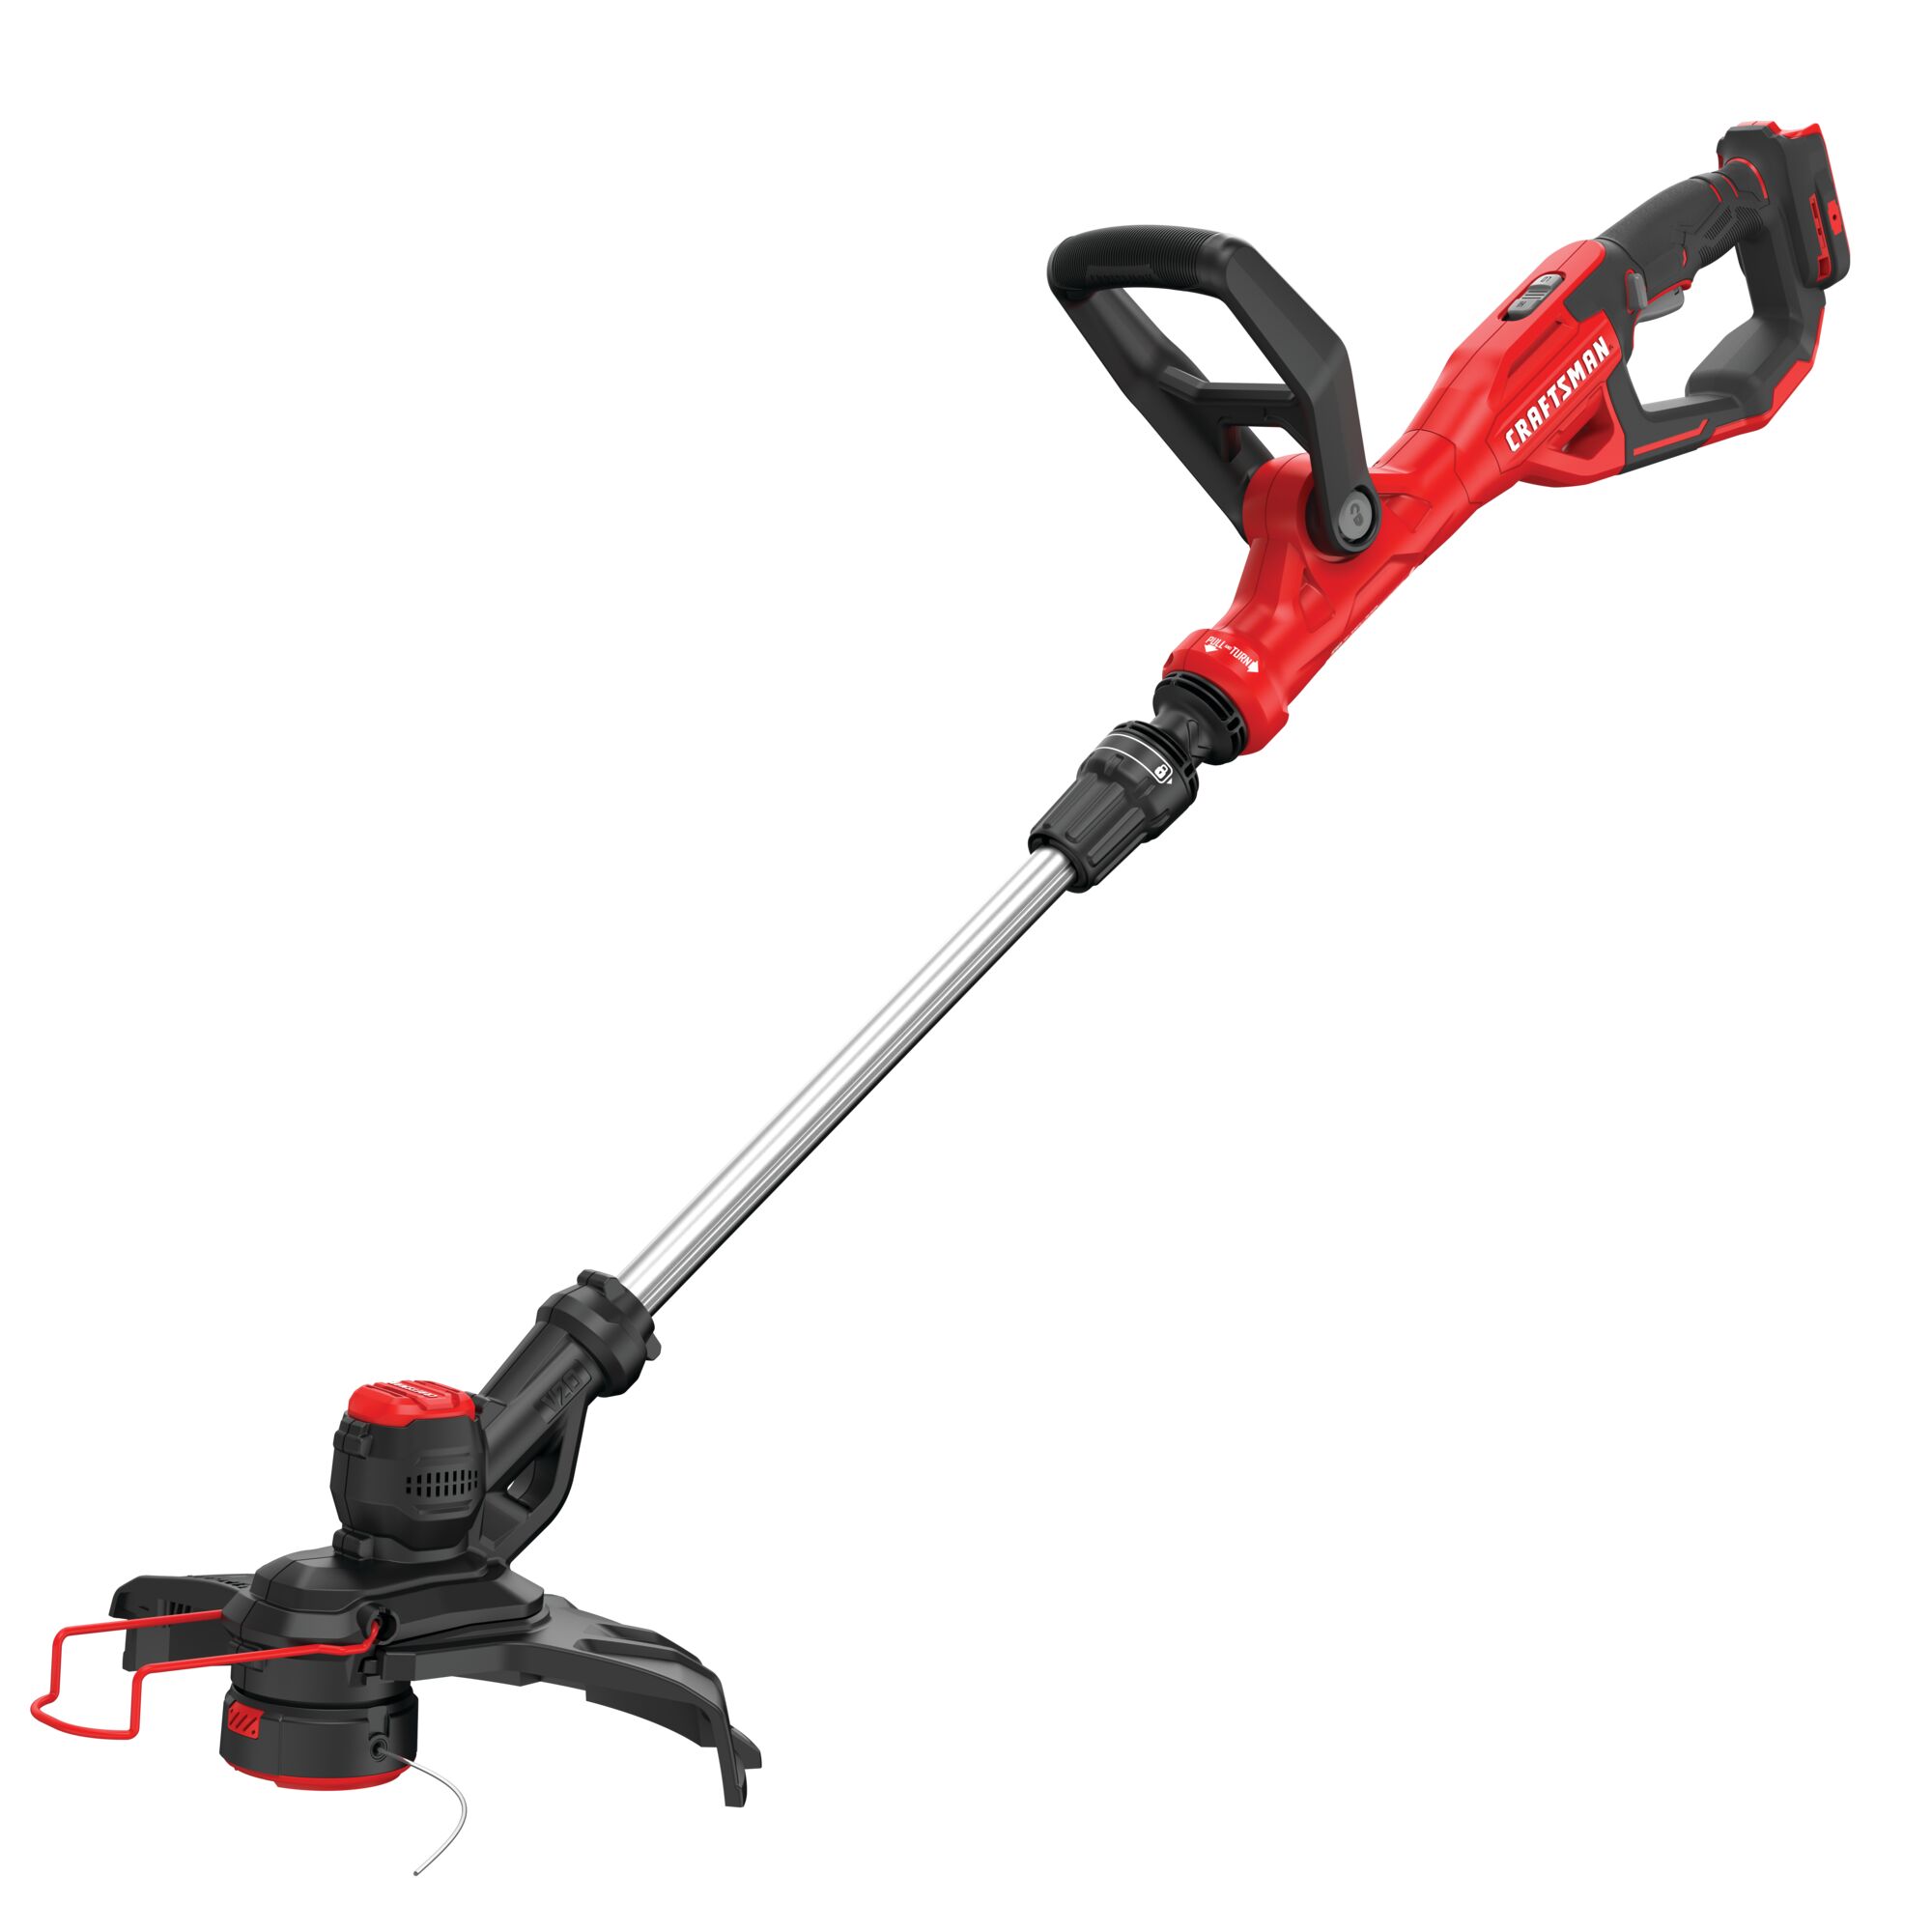 Close up of 20 volt weedwacker 13 inch cordless string trimmer and edger with automatic feed kit.